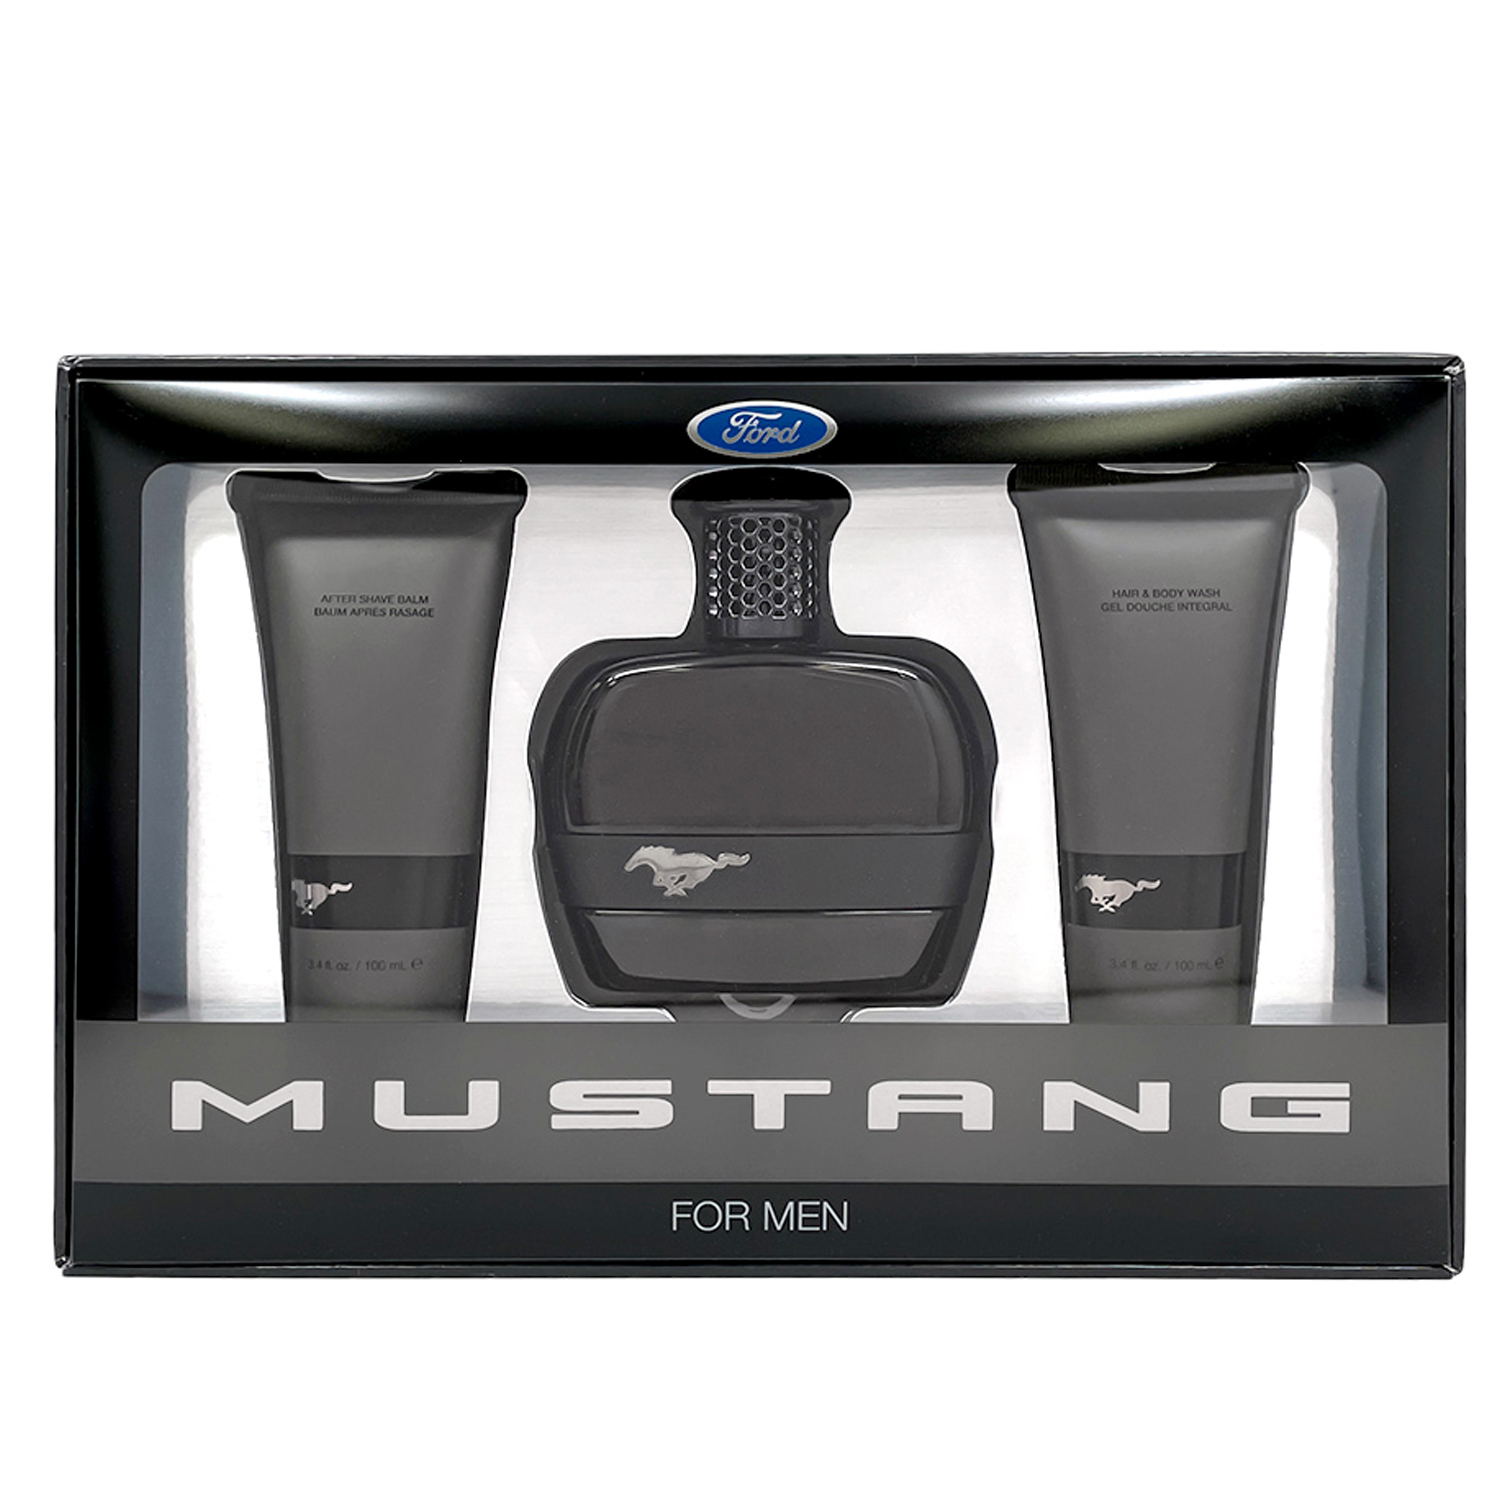 Bridge and Oz Hair - Body Mustang / Black Wash After Beauty Balm Edt/3.4 - 3.4 Set Oz Oz 3.4 Shave